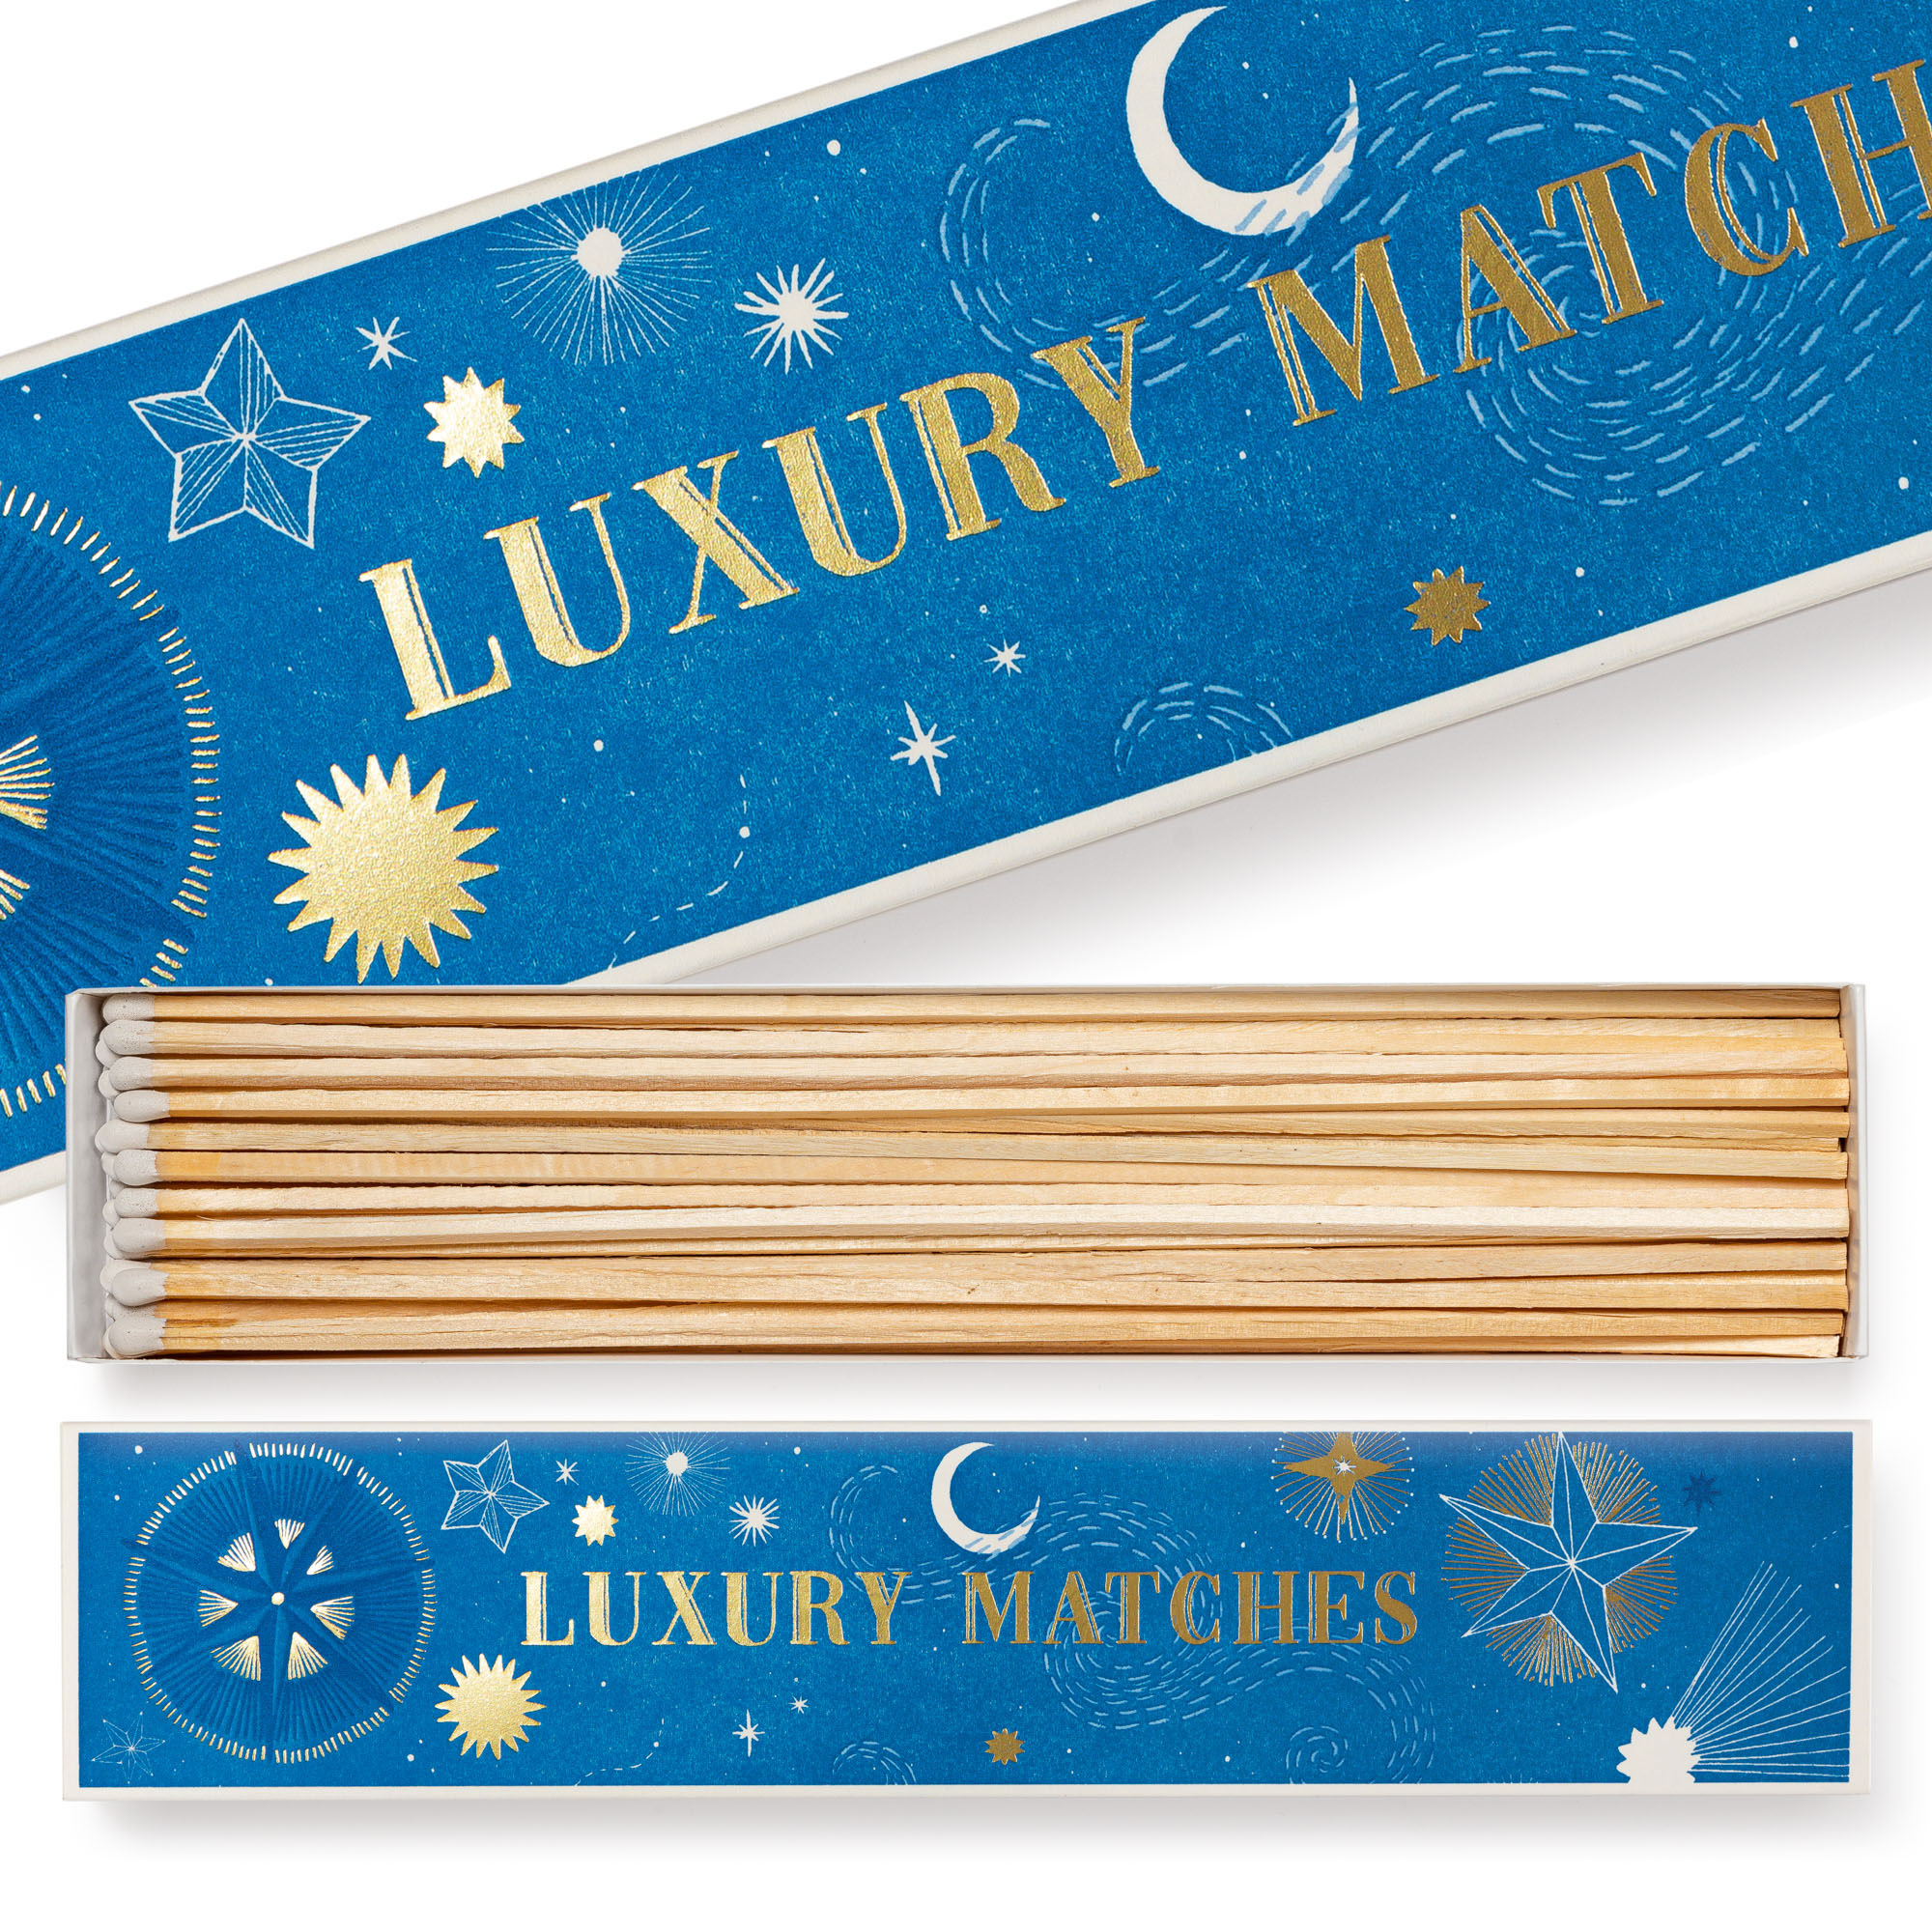 Starry Sky - Long Matchboxes - Ariane Butto - from Archivist Gallery 